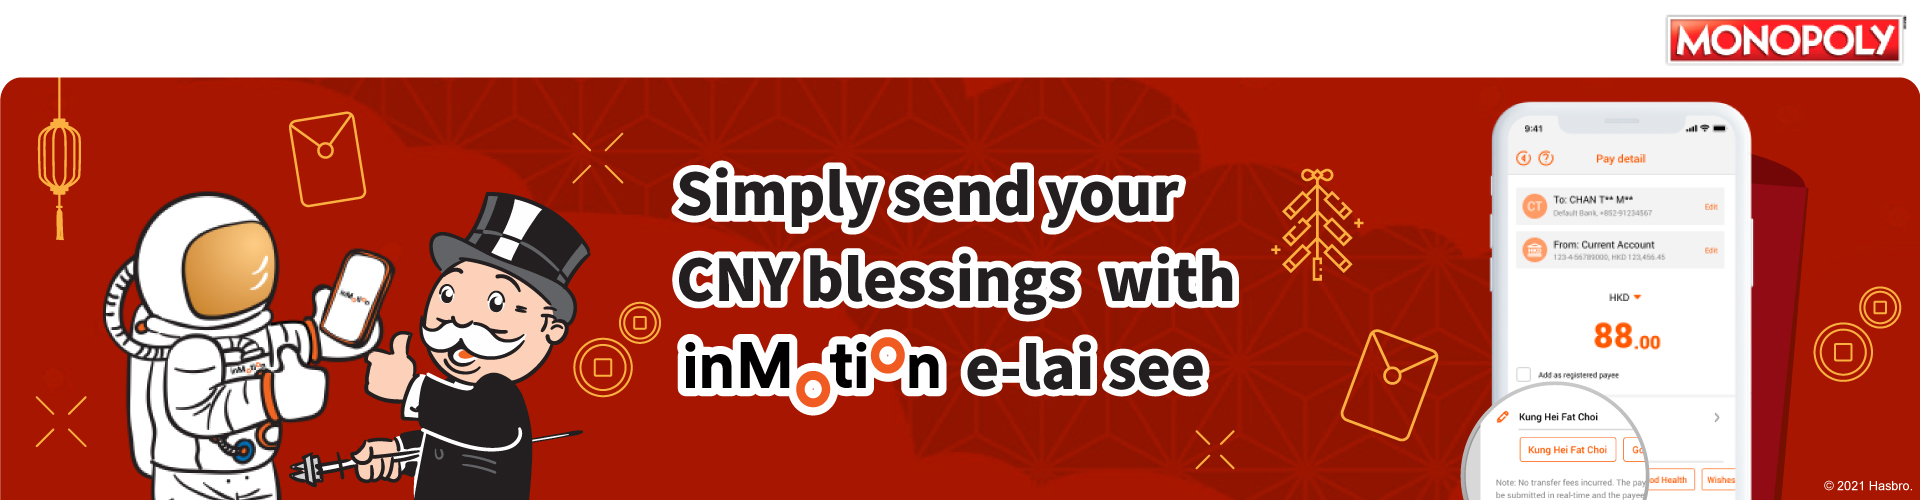 Simply send and receive your CNY blessings with inMotion e-lai see